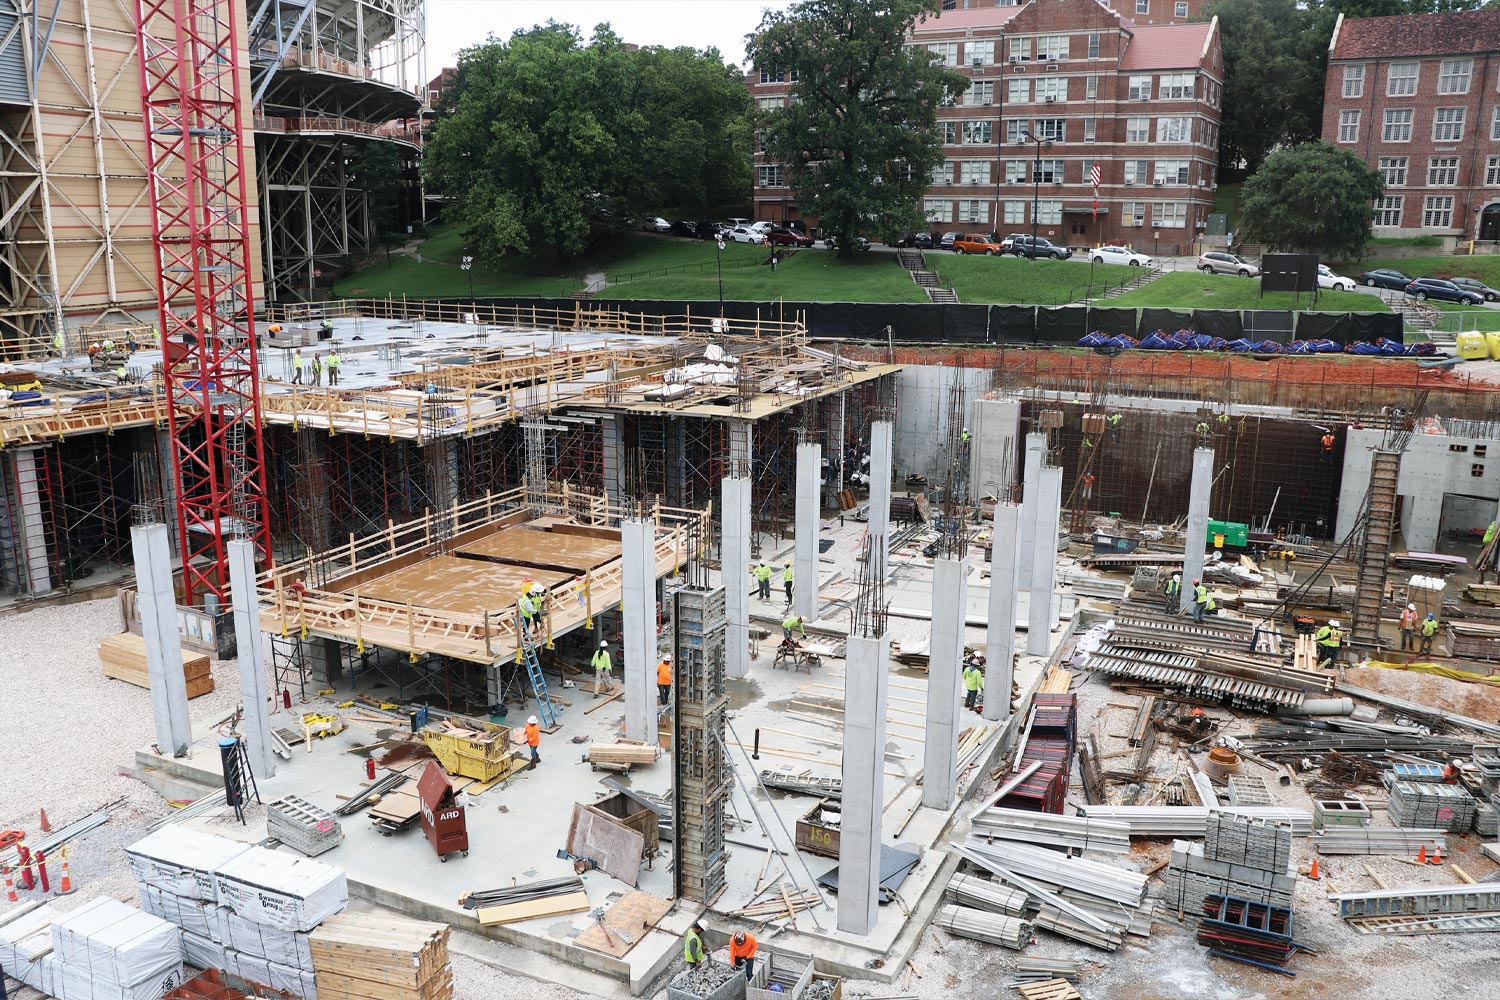 By June 2019, multiple floors were underway and started showing the layout of the building.